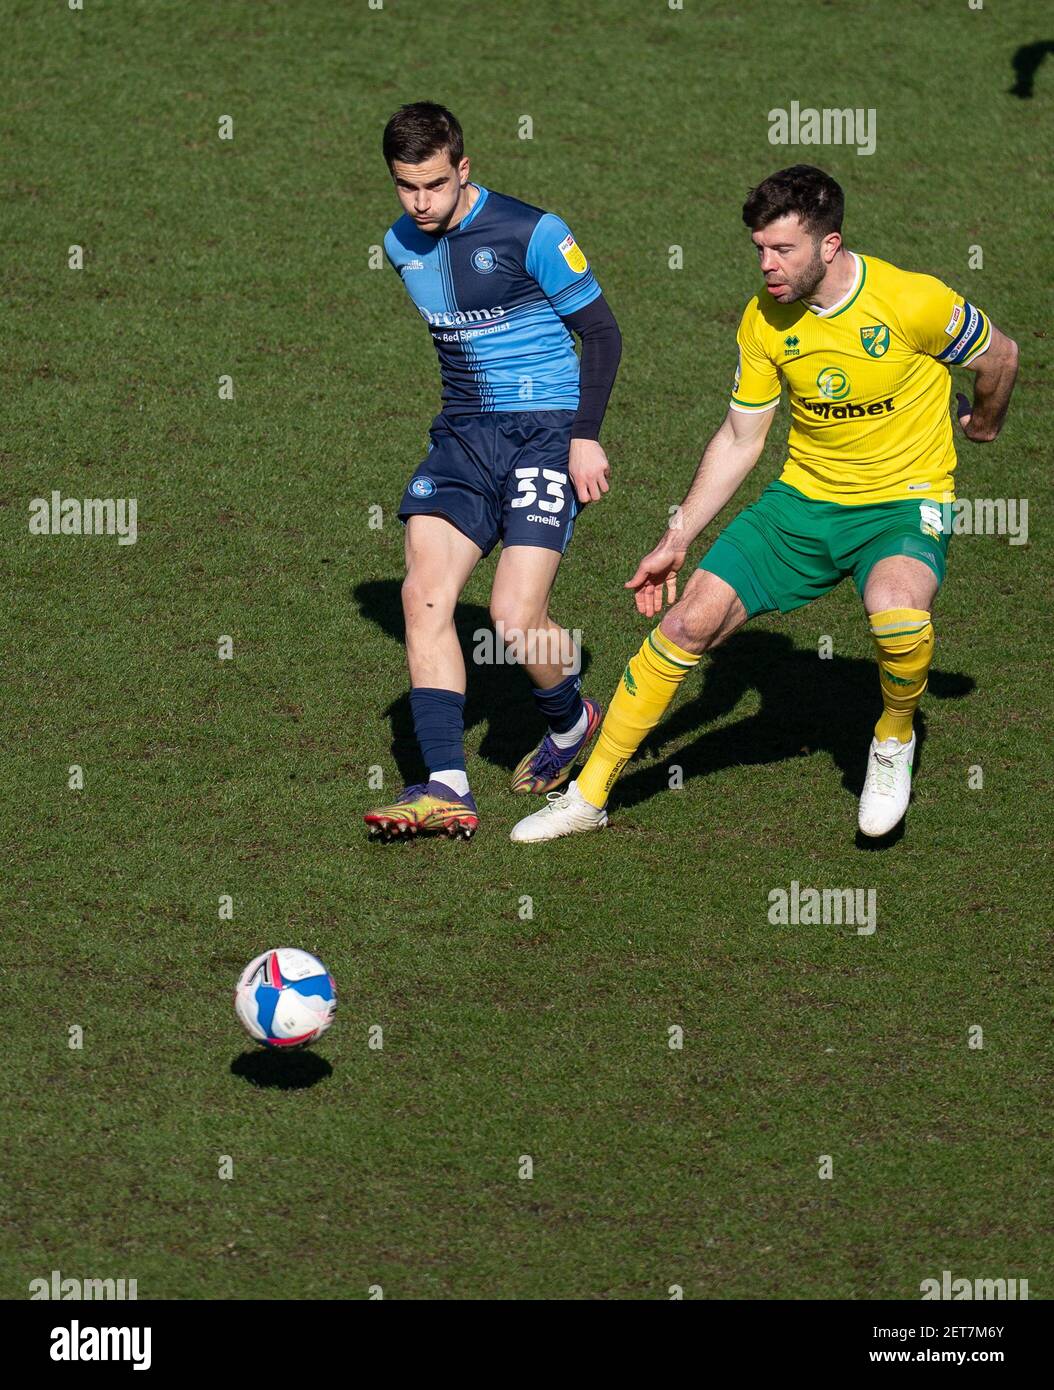 High Wycombe, UK. 28th Feb, 2021. Anis Mehmeti of Wycombe Wanderers & Grant Hanley of Norwich City during the Sky Bet Championship behind closed doors match between Wycombe Wanderers and Norwich City at Adams Park, High Wycombe, England on 28 February 2021. Photo by Andy Rowland. Credit: PRiME Media Images/Alamy Live News Stock Photo